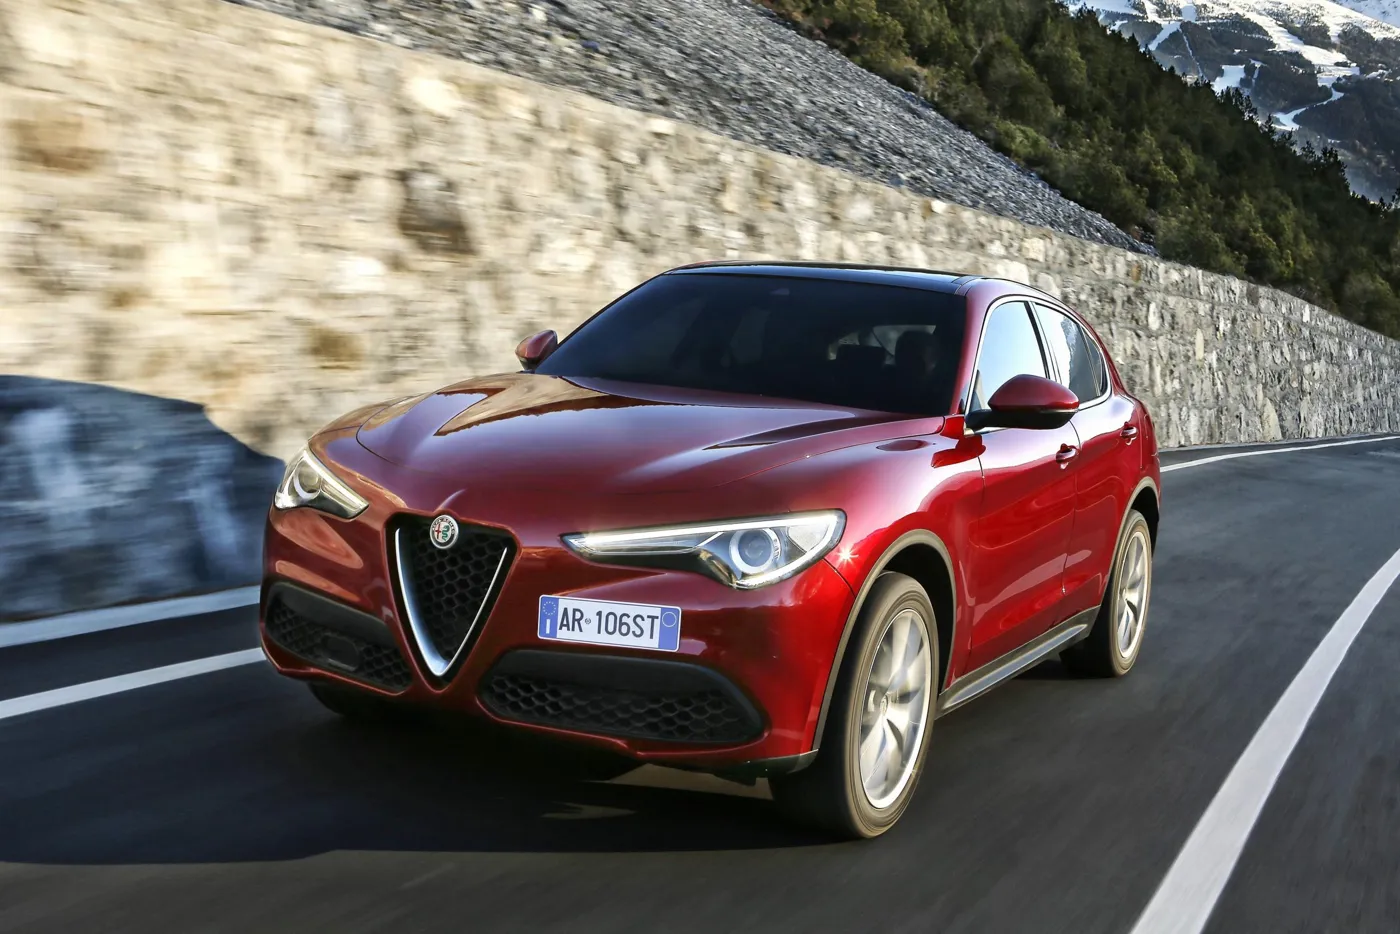 Alfa Romeo unveils Stelvio SUV for first time in Europe